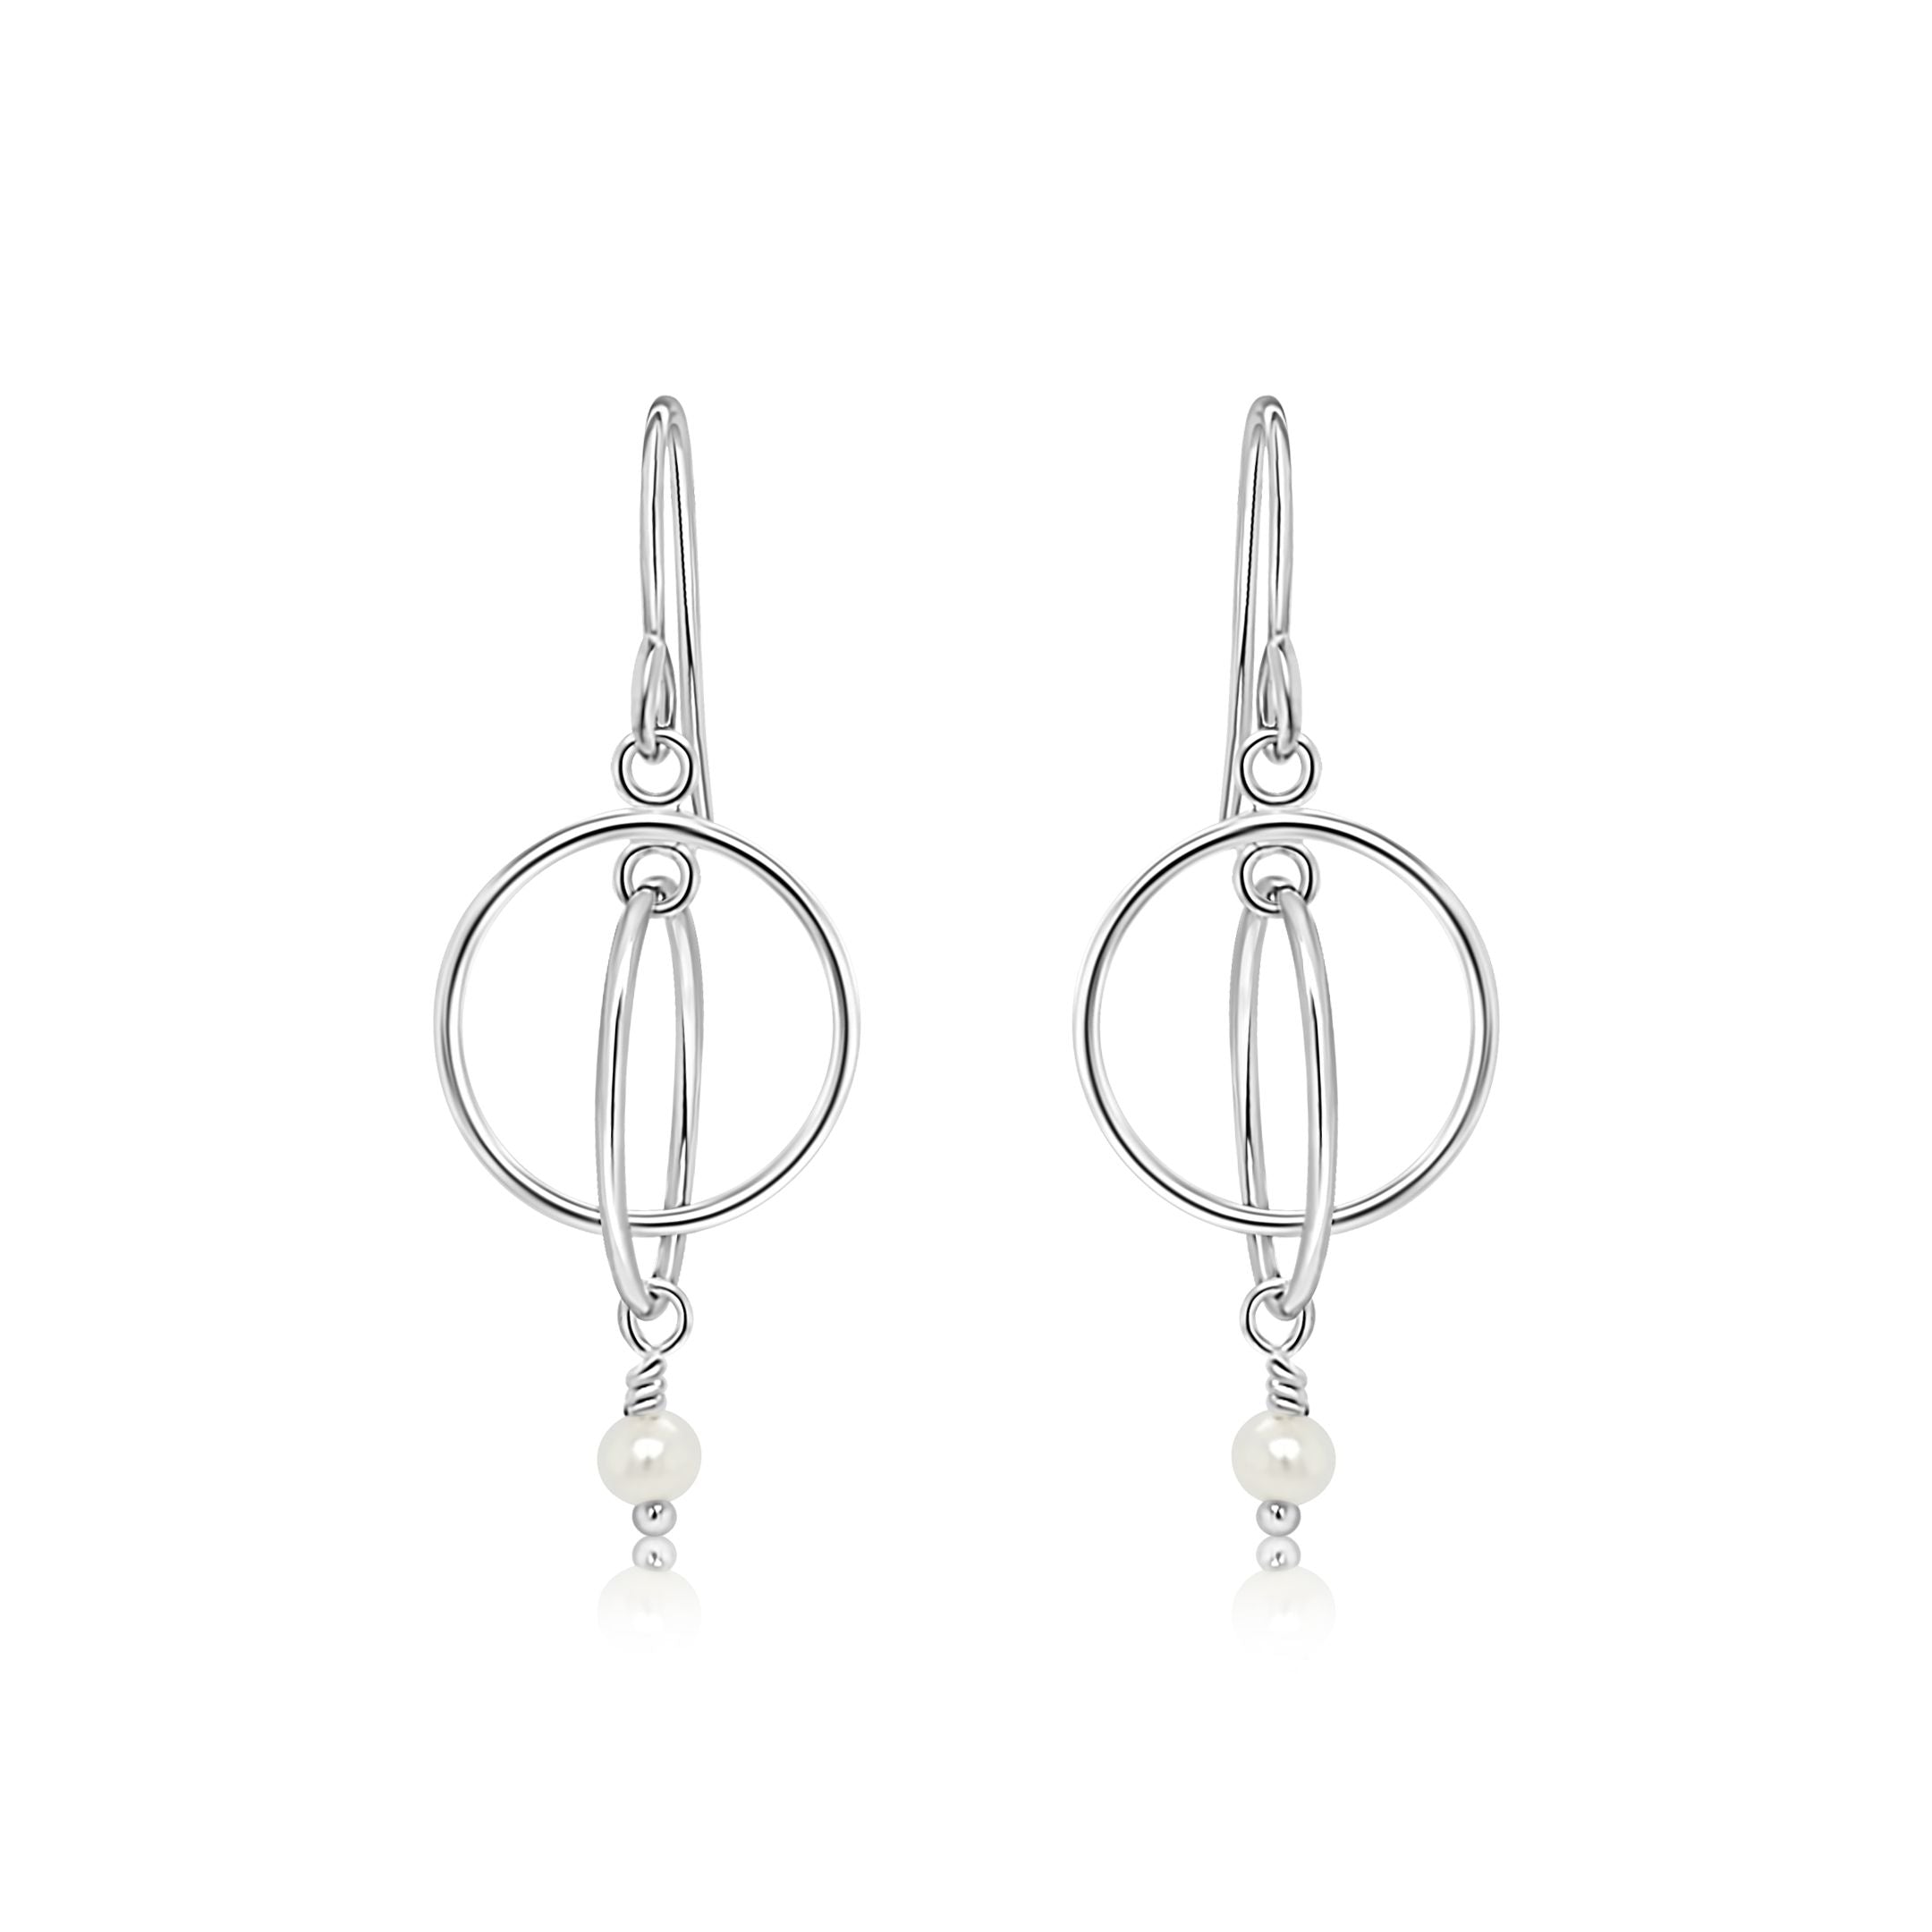 Double Circle Sterling Silver Earrings with Freshwater Pearls